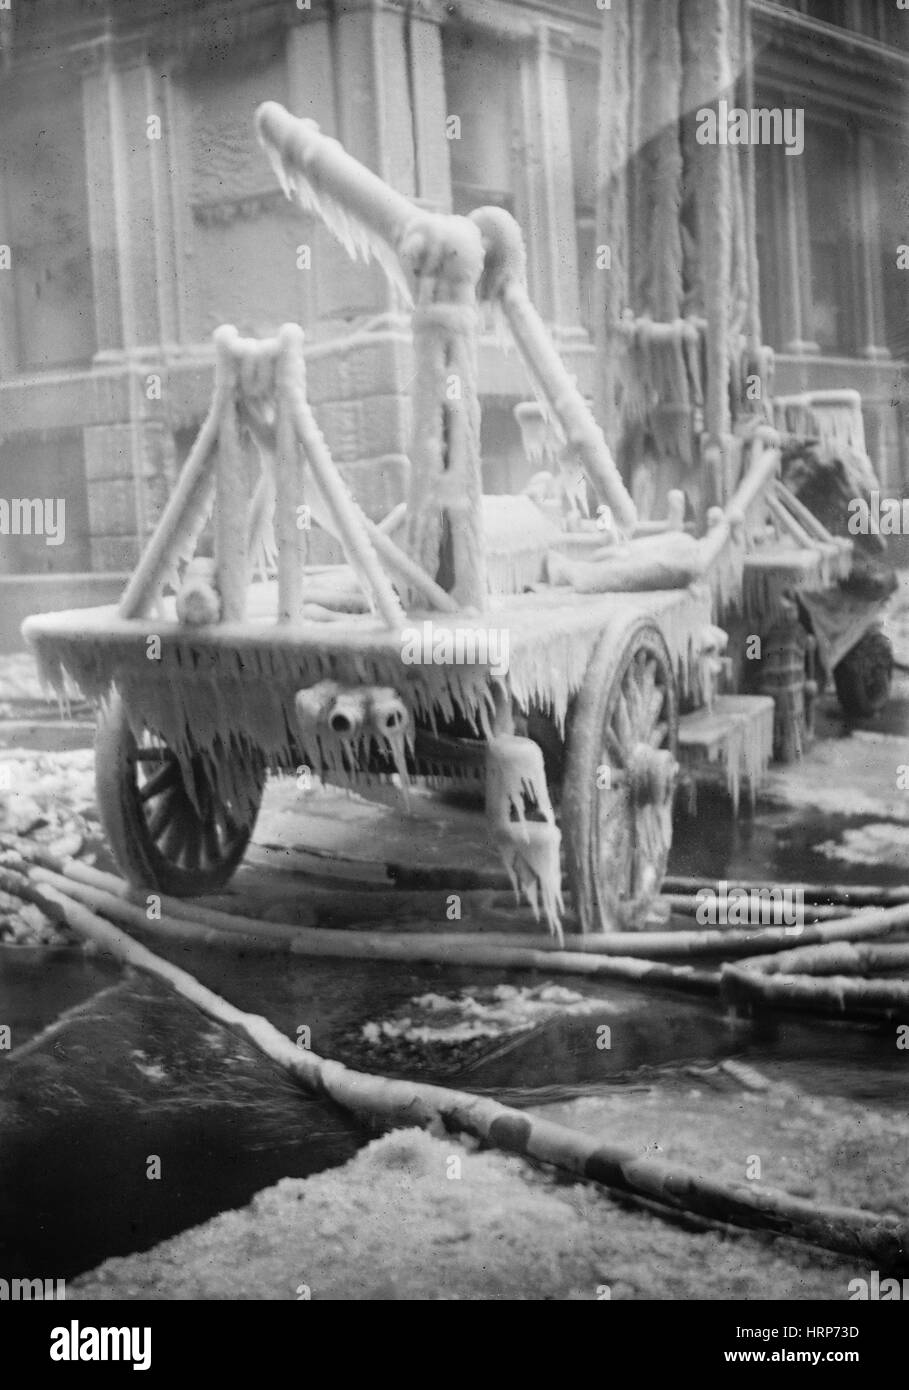 NYC, Equitable Life Assurance Fire Aftermath, 1912 Stock Photo